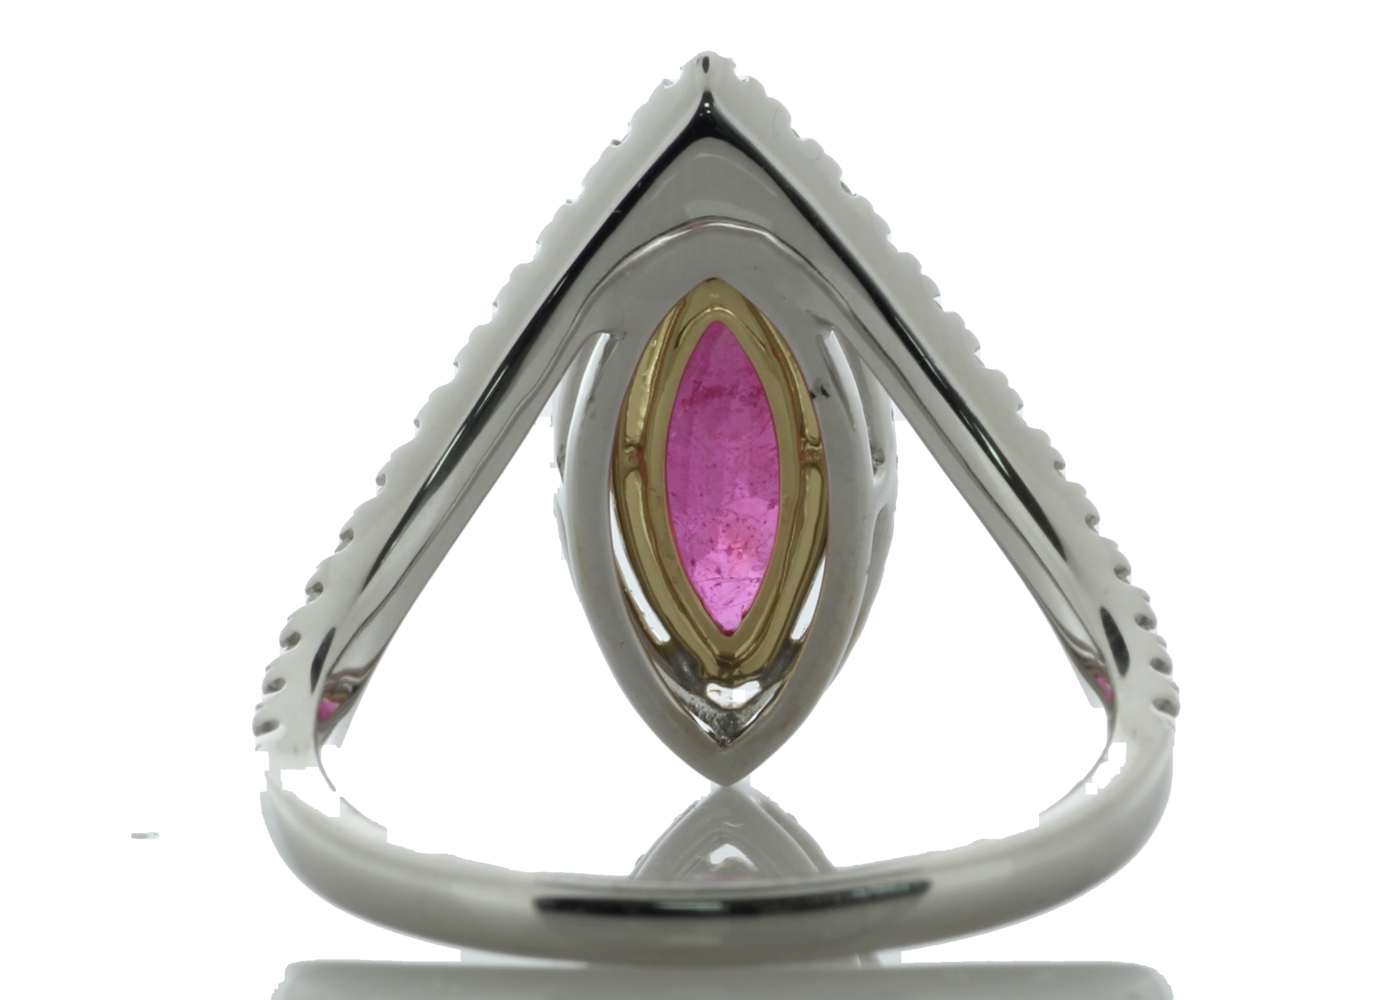 18ct White Gold Marquise Cut Ruby and Diamond Ring (R2.11) 0.47 Carats - Image 5 of 6